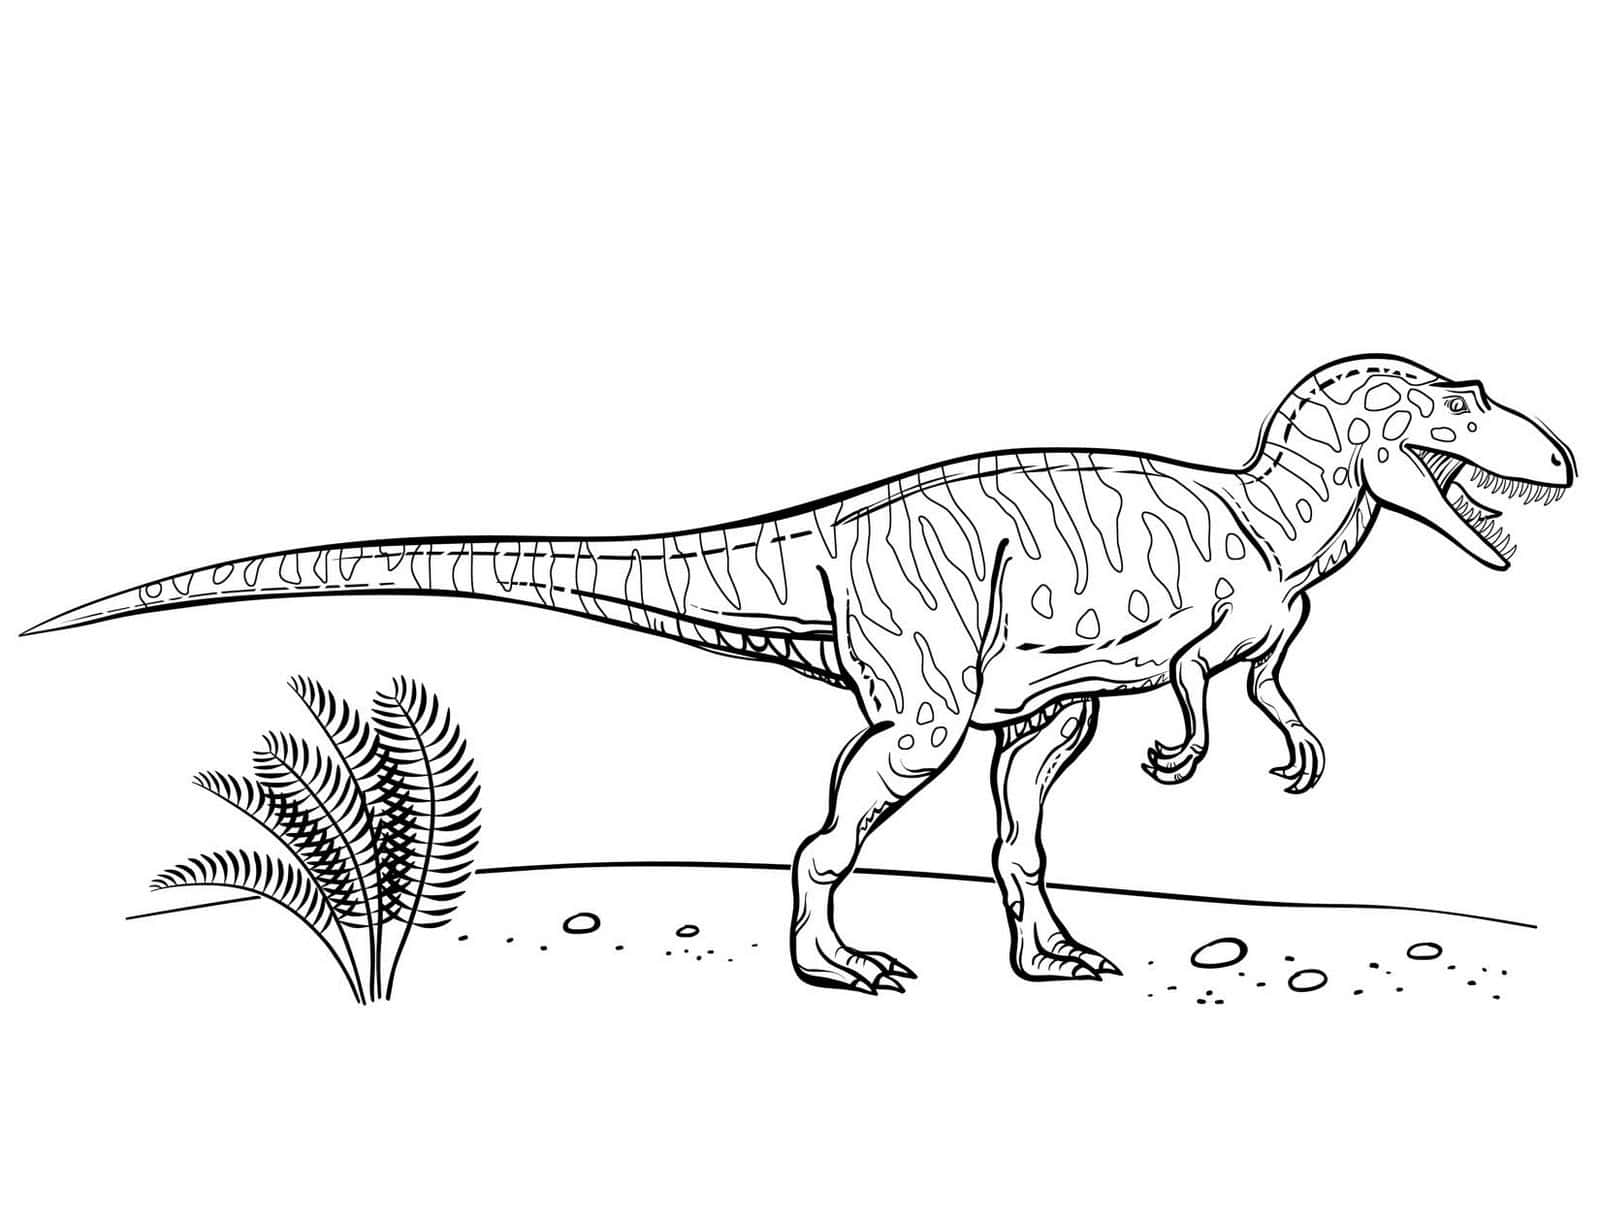 A T - Rex Dinosaur Coloring Page